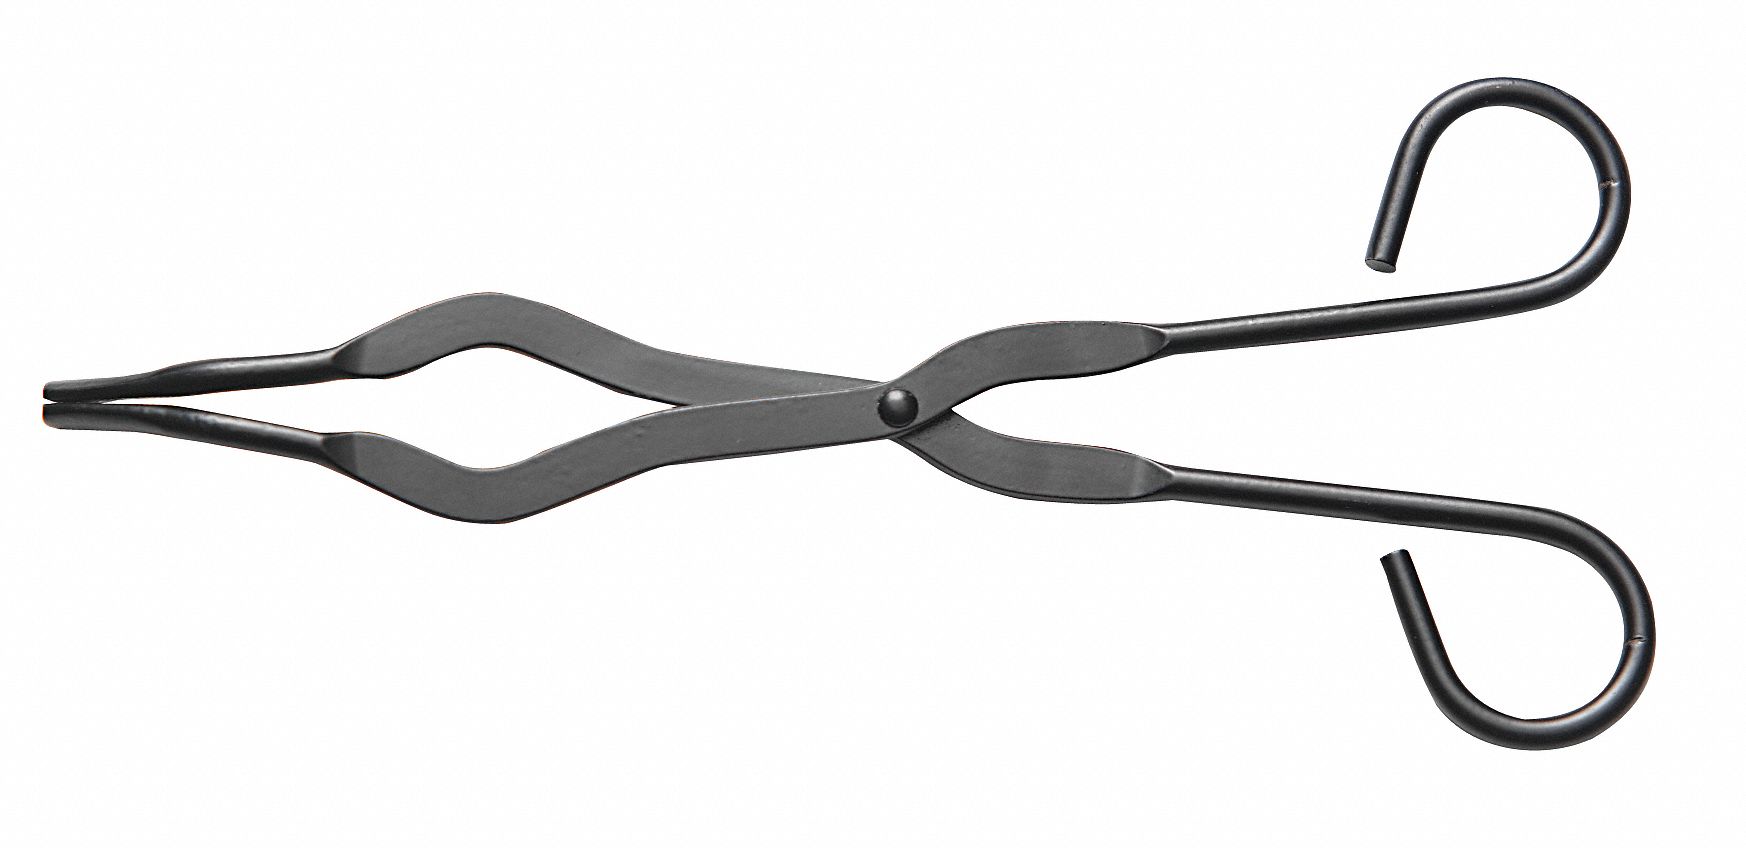 APPROVED VENDOR CRUCIBLE TONGS,SERRATED 9 IN - Laboratory Tongs